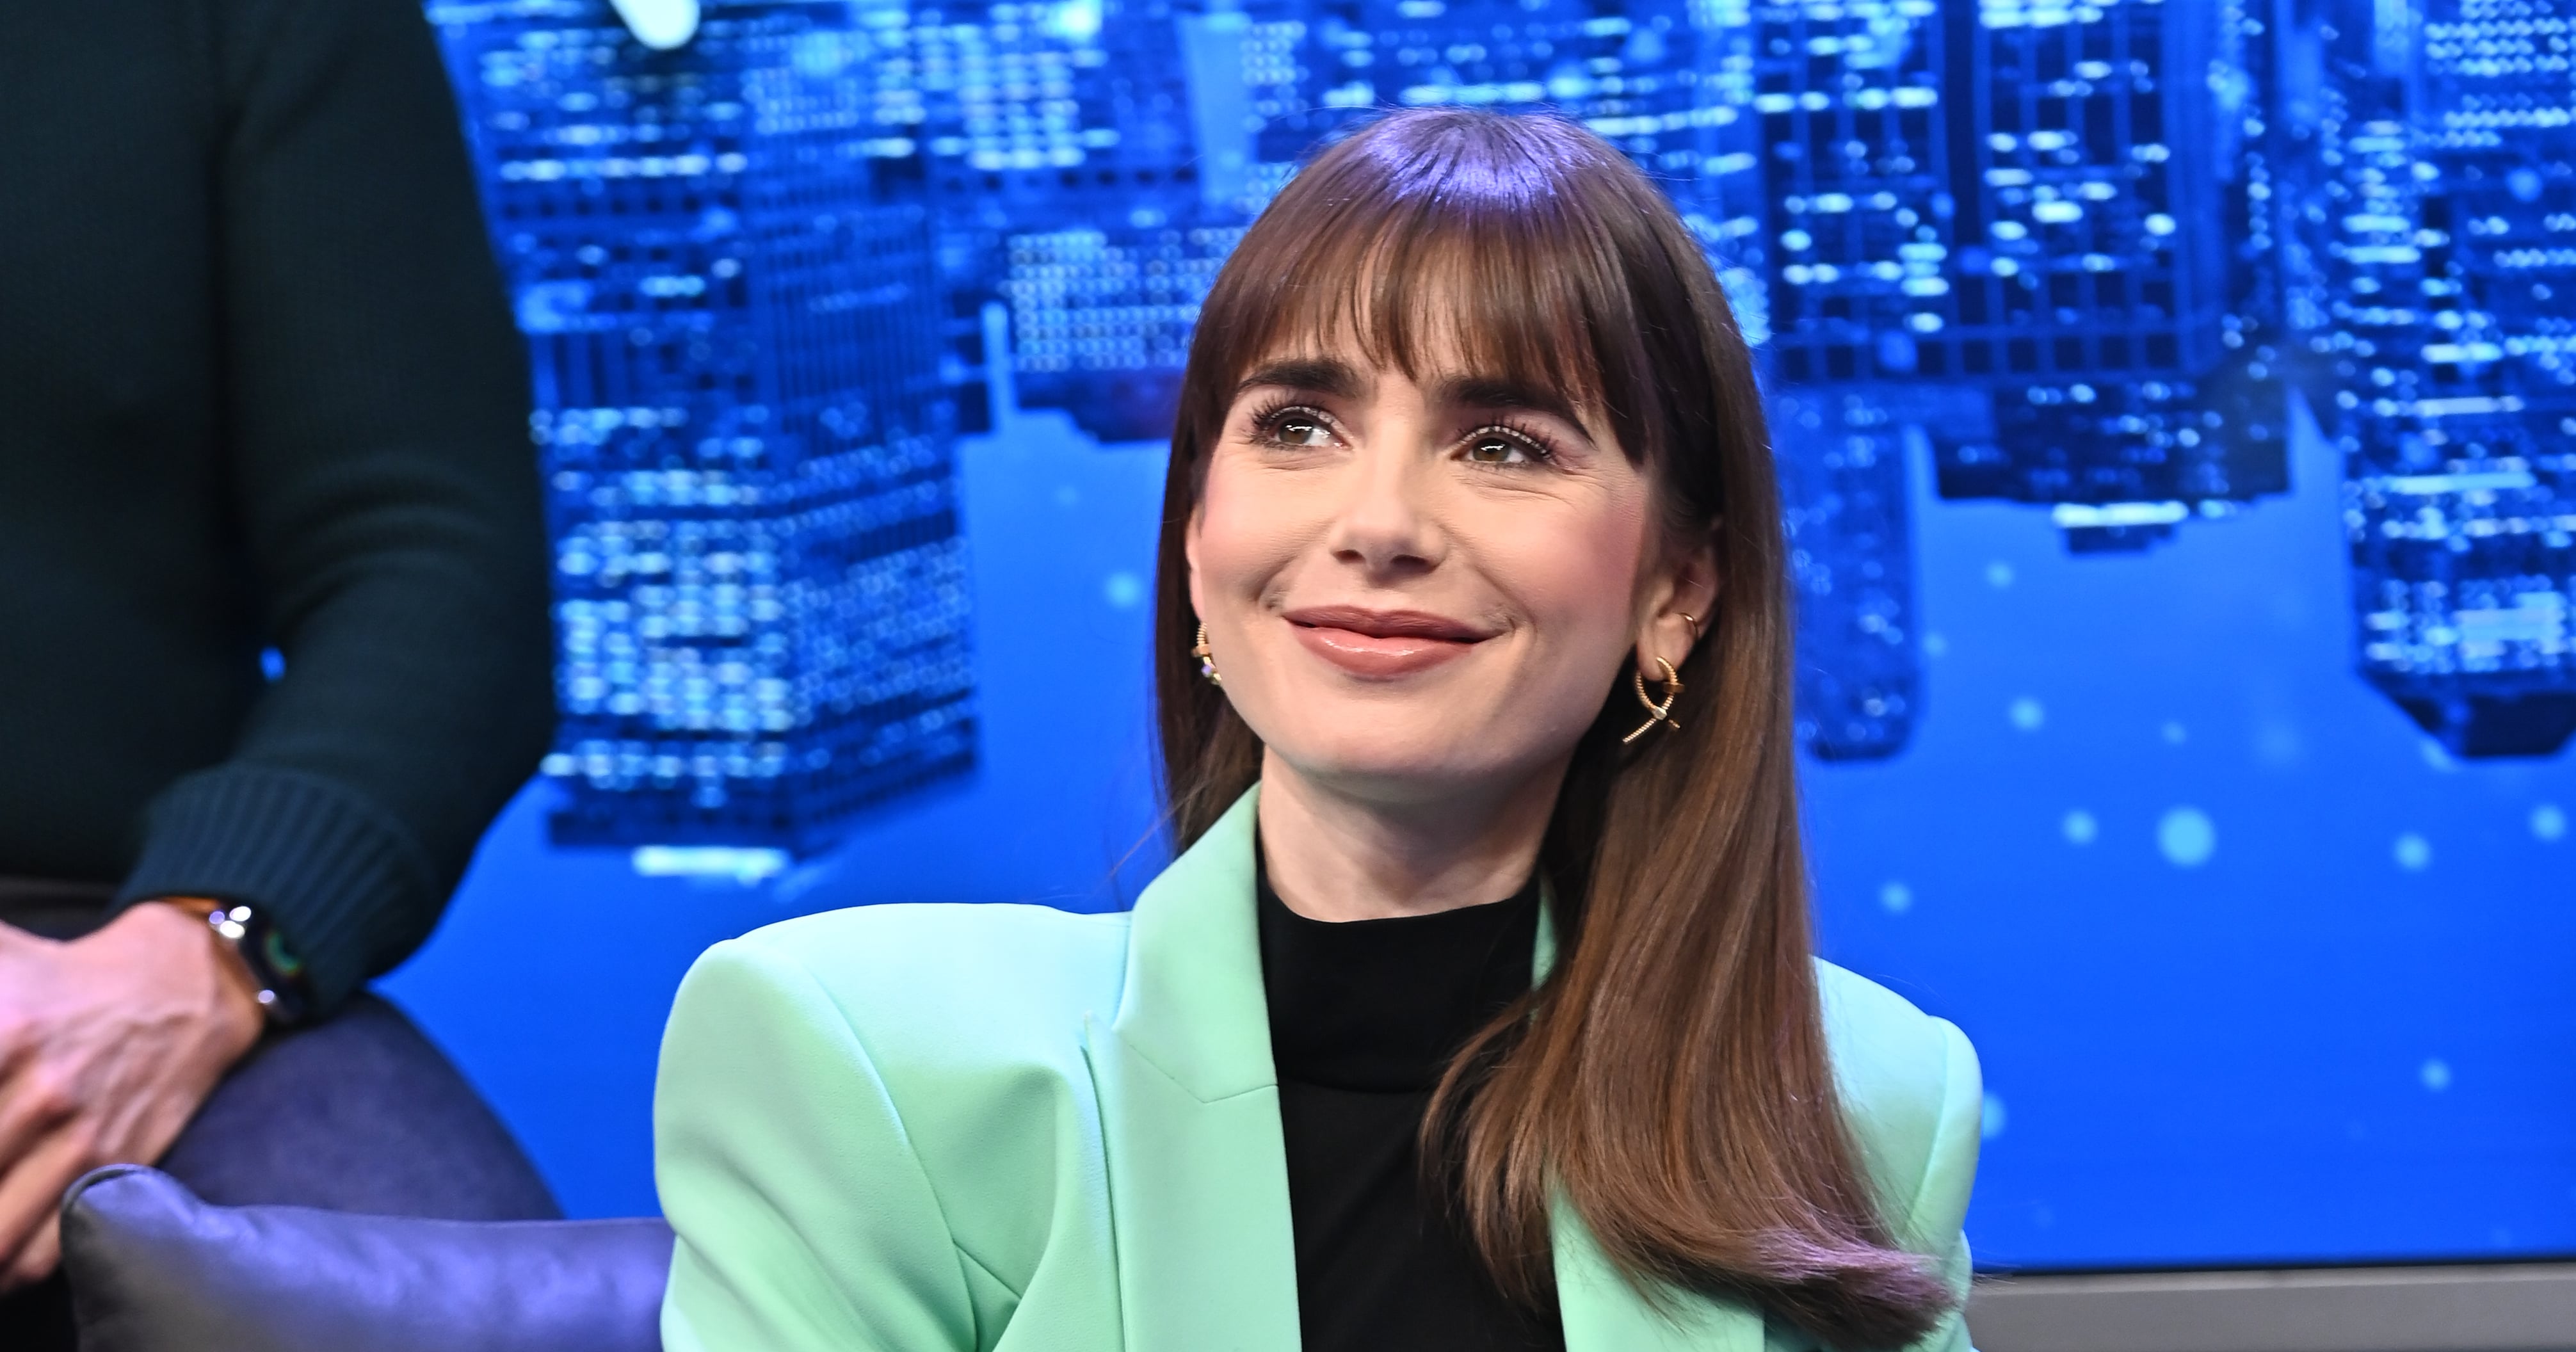 Everything We Know About Lily Collins and Lena Dunham’s “Polly Pocket” Movie